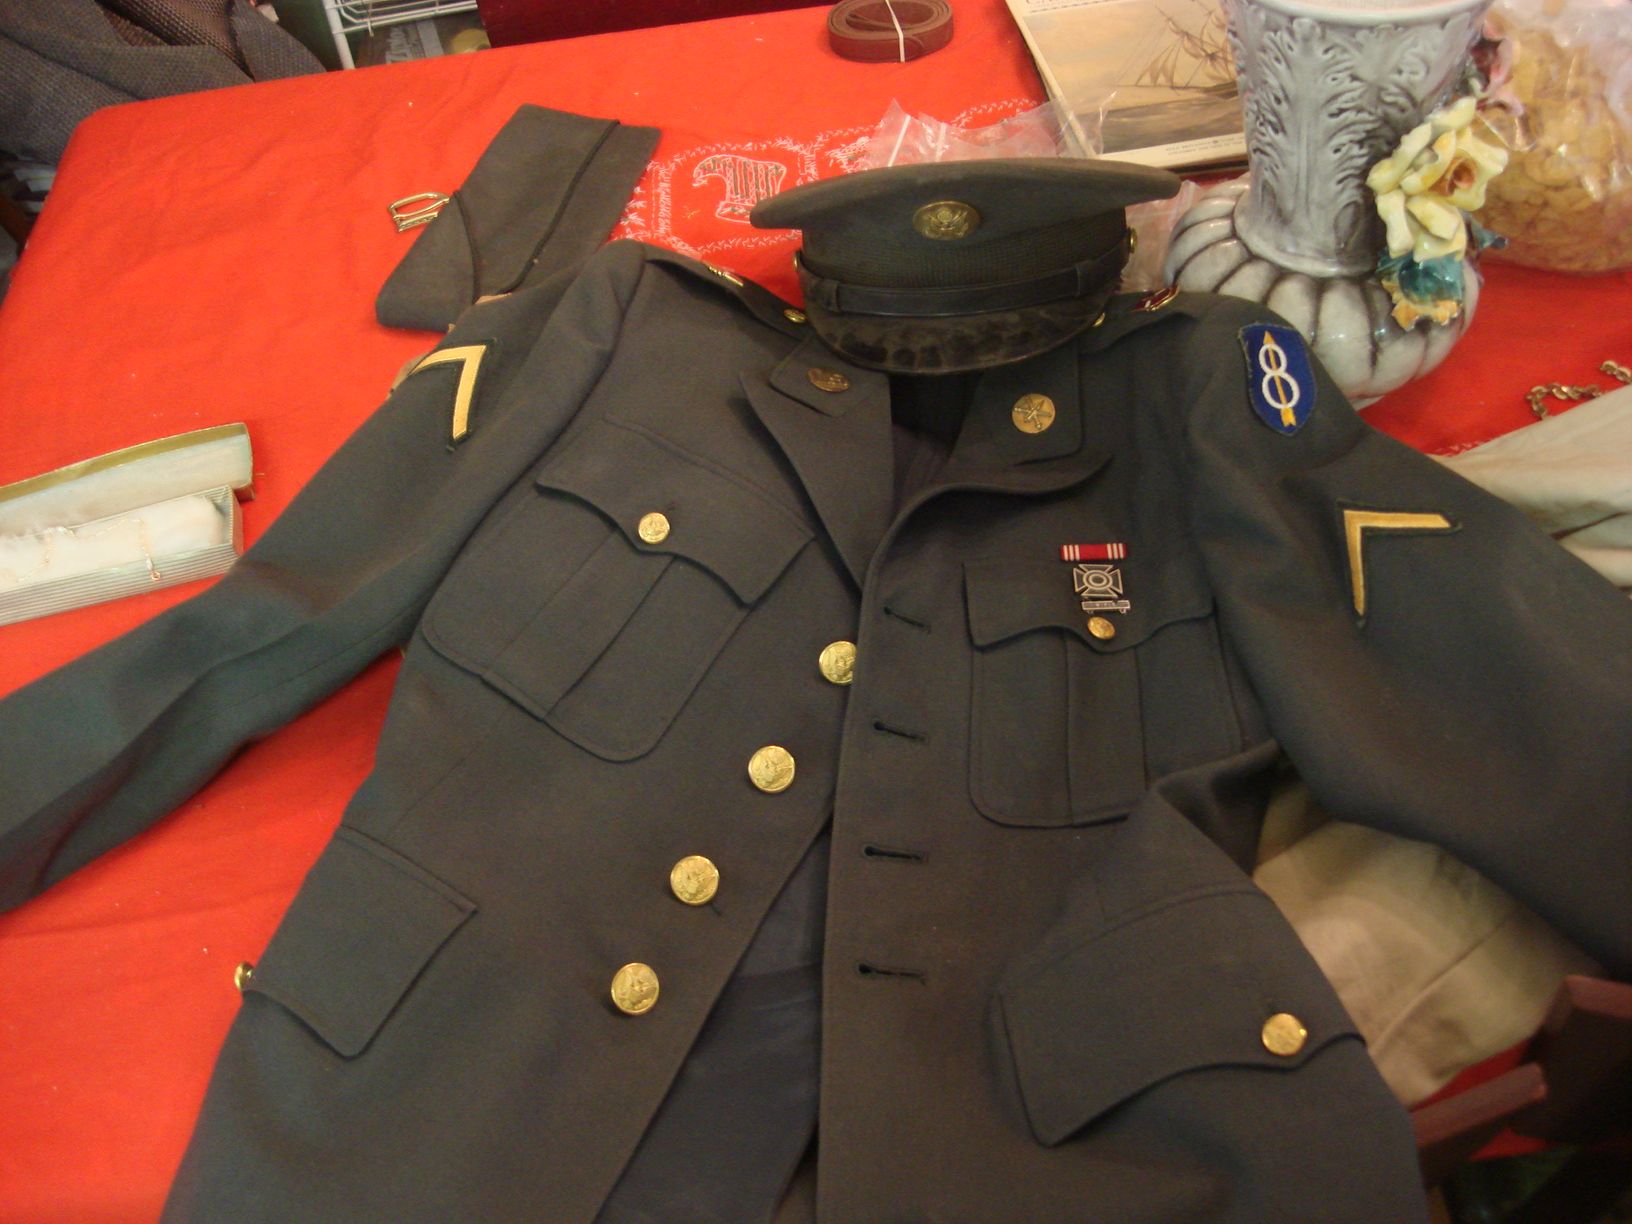 1960's US Soldier's Uniform with Sterling Rifleman's Pin. Served in West Germany.